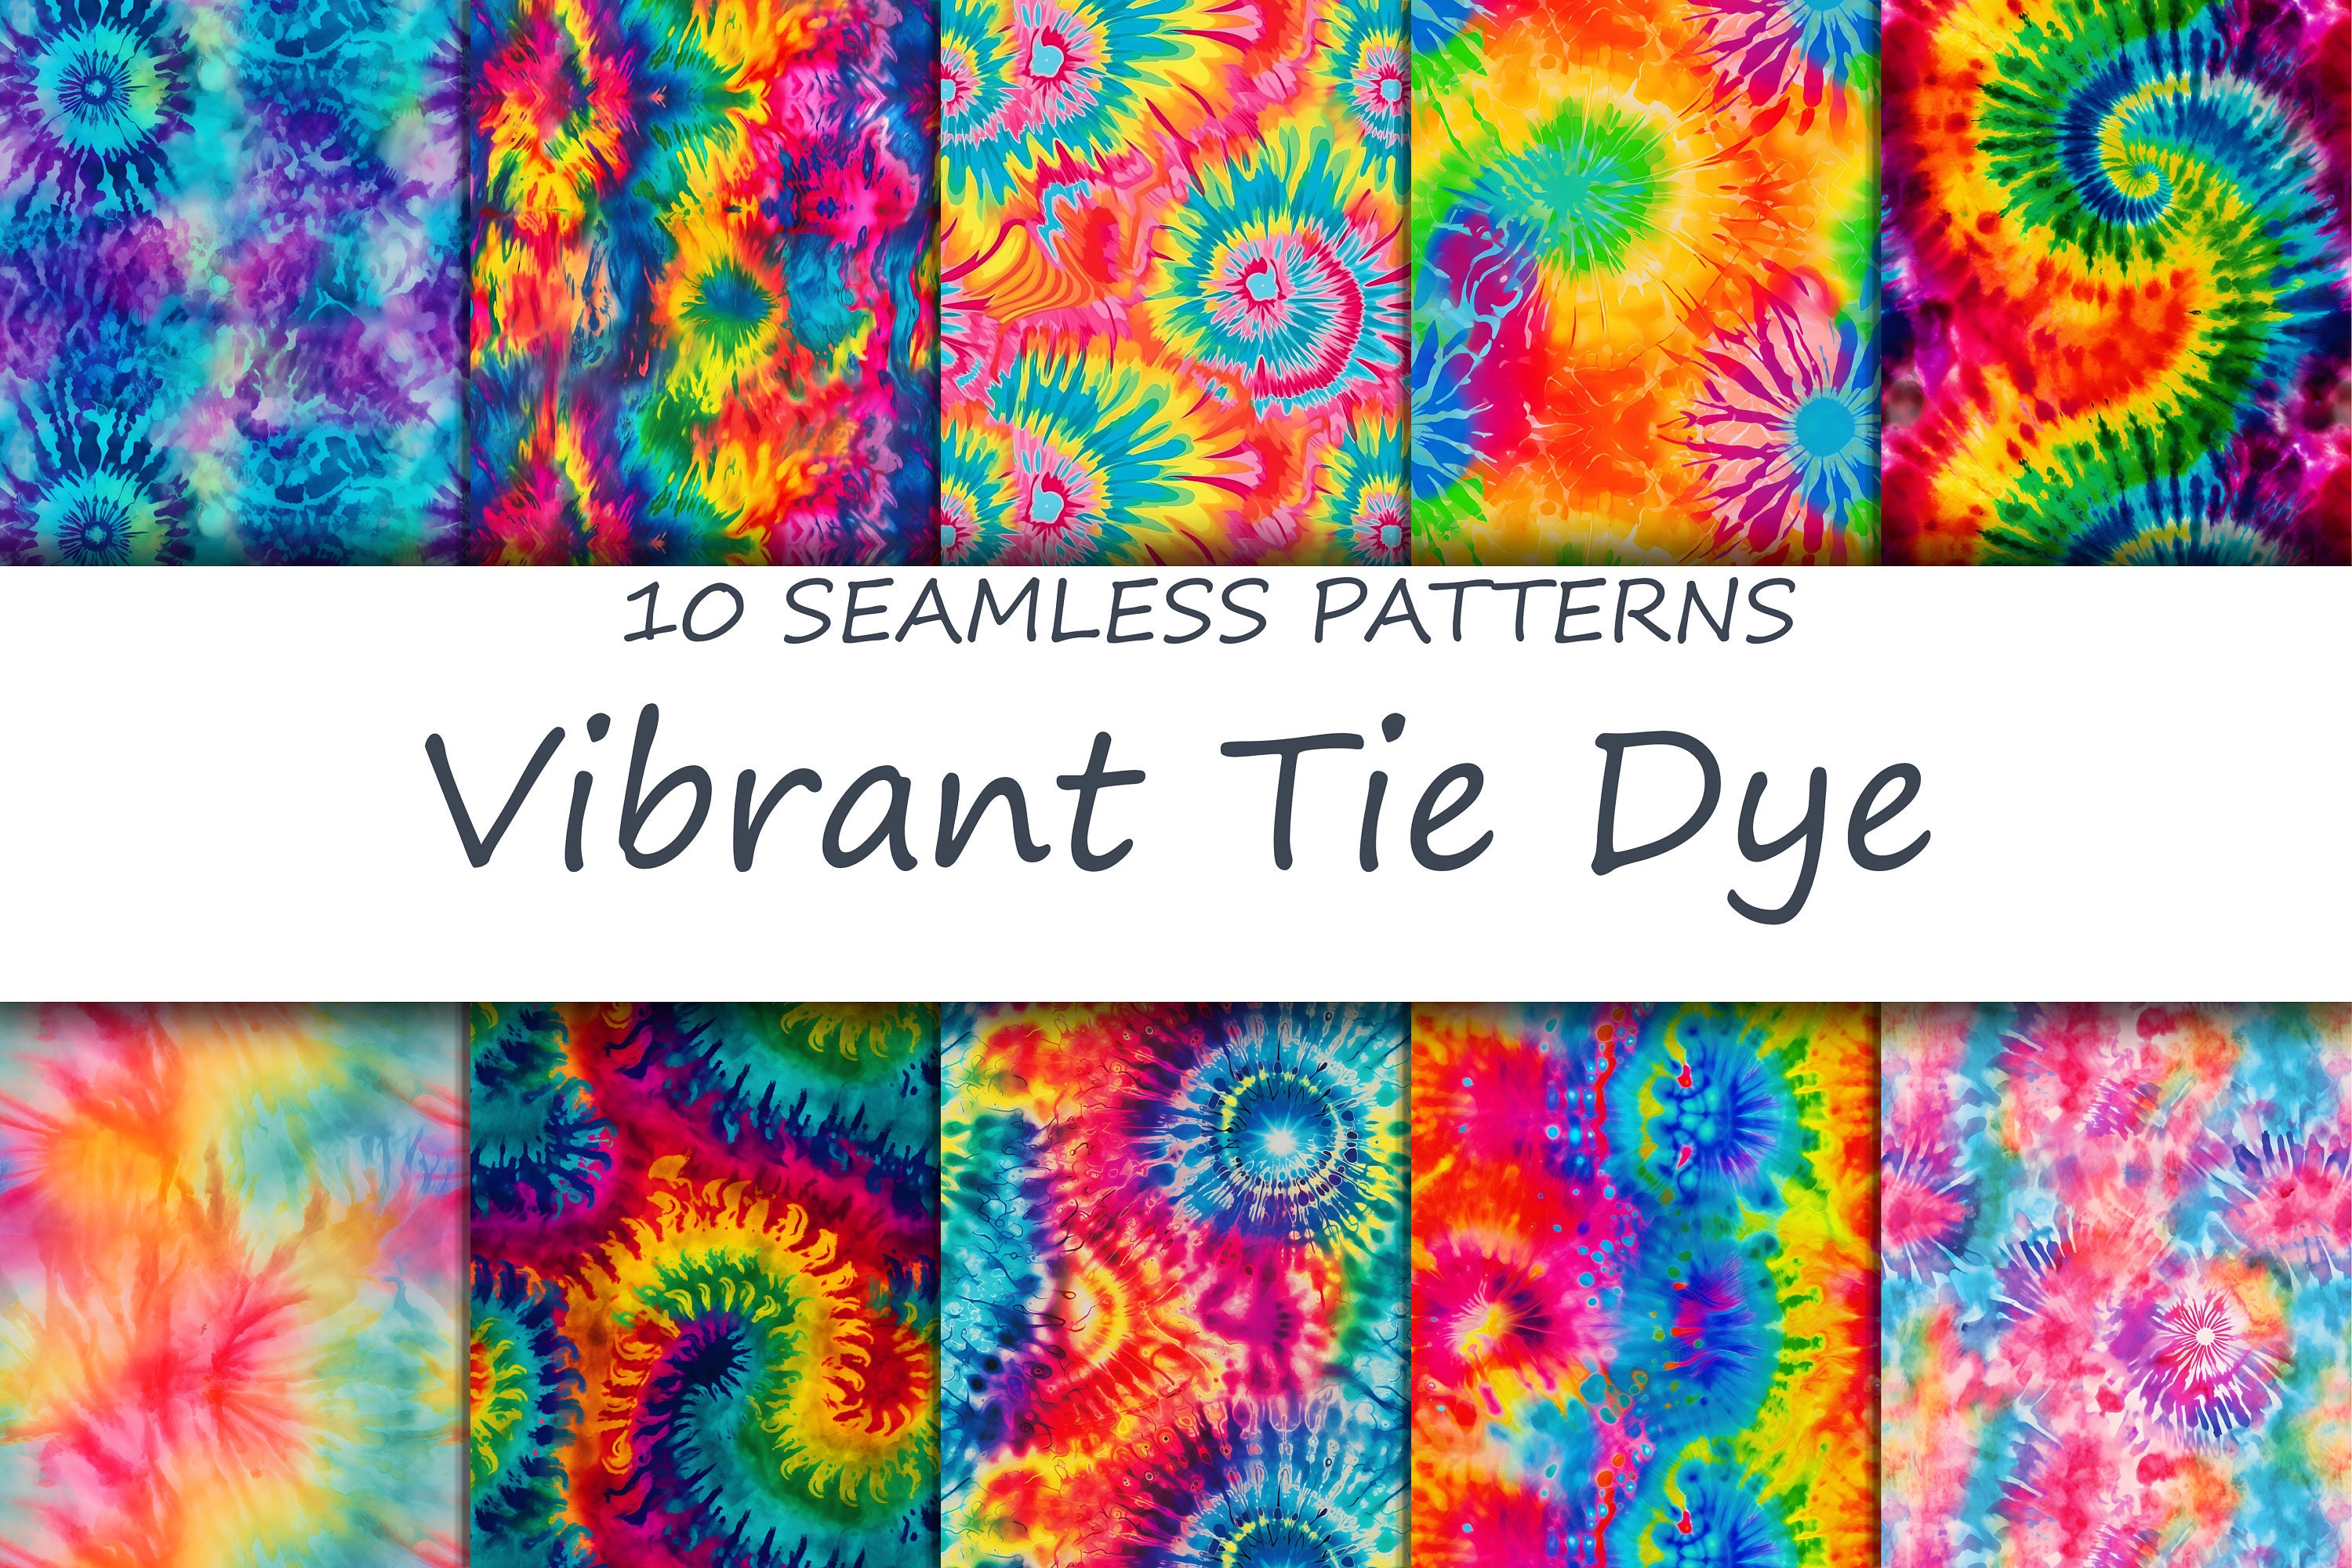 VIBRANT TIE DYE 10 Seamless Patterns, Tie Dye Pattern, Vibrant Background,  Commercial Use, Instant Download, Digital Scrapbooking 